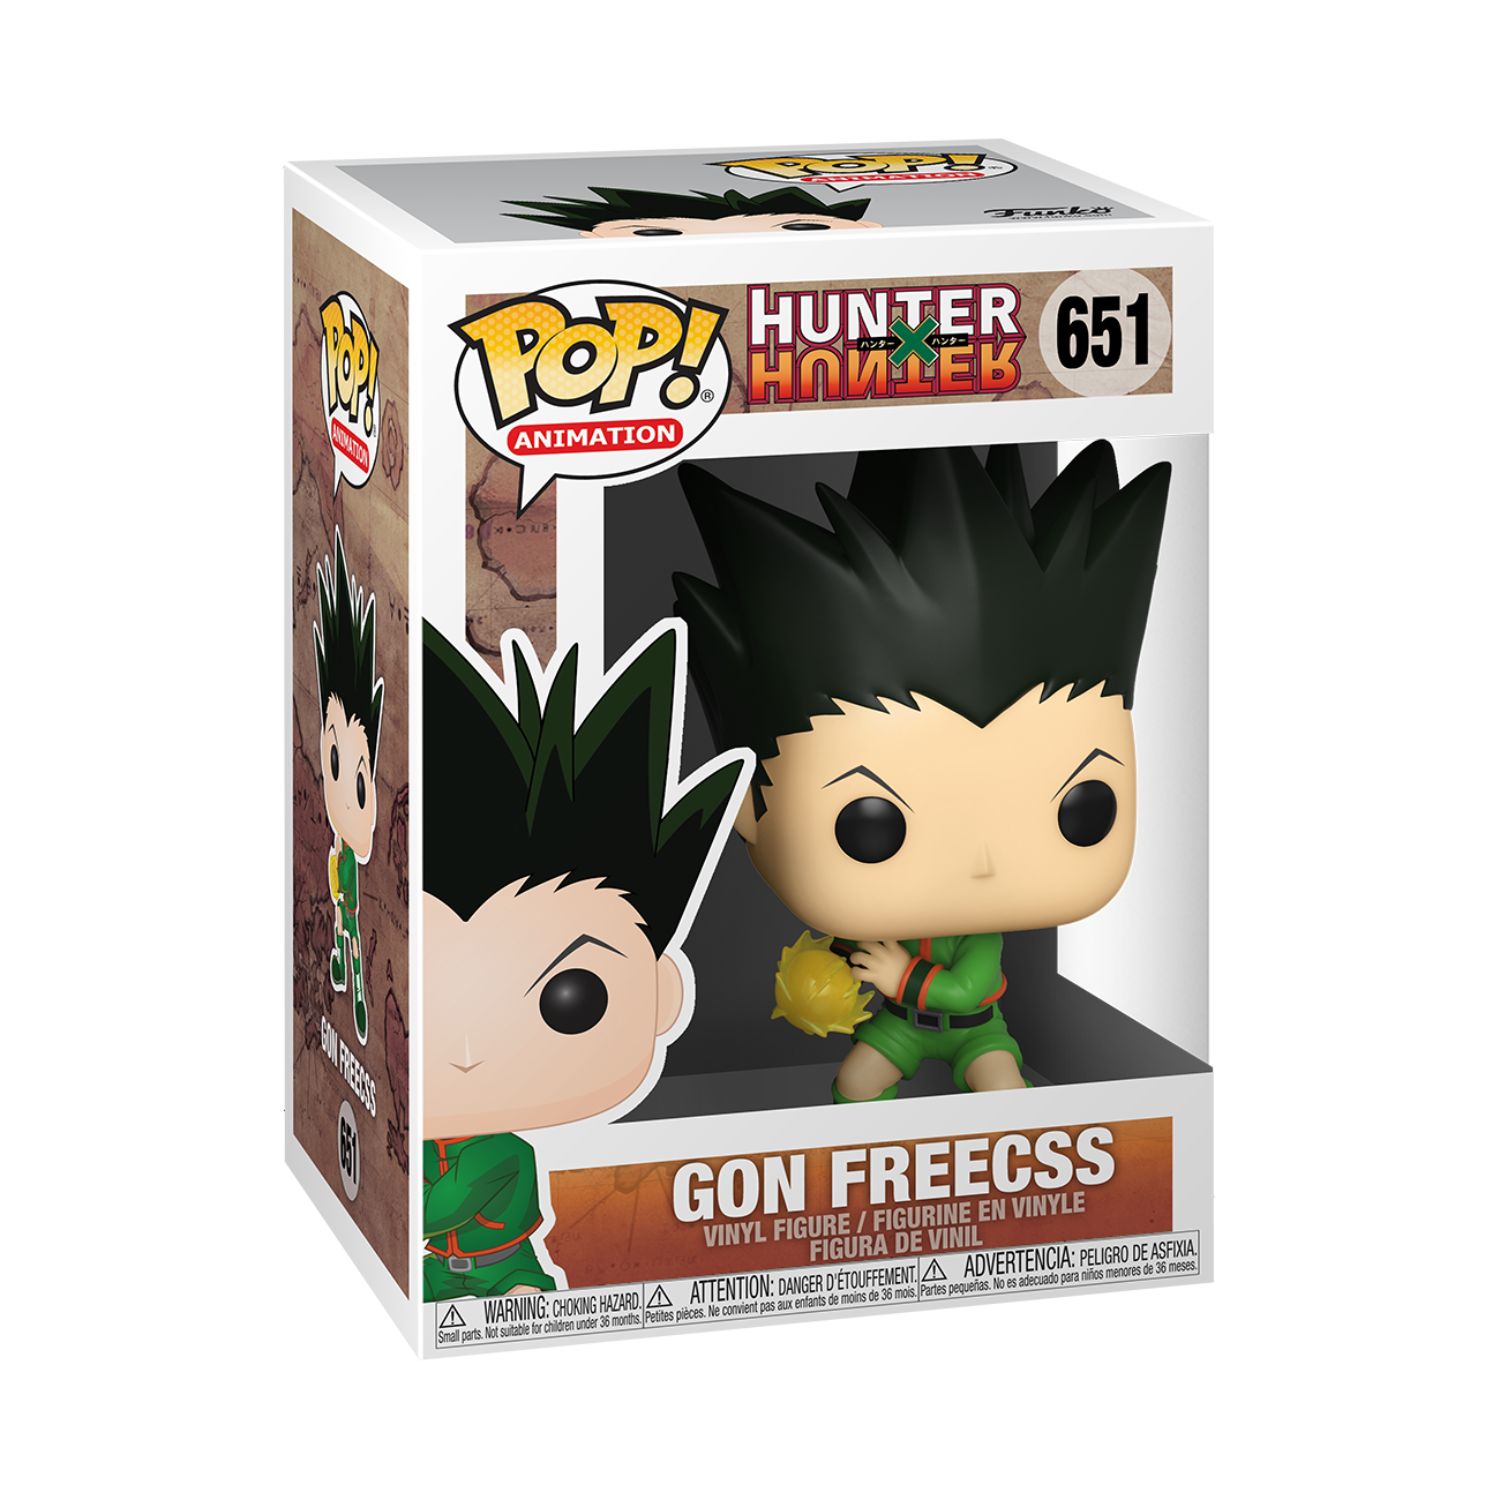 Funko POP Animation Collectible featuring Gon Freecss from Hunter X